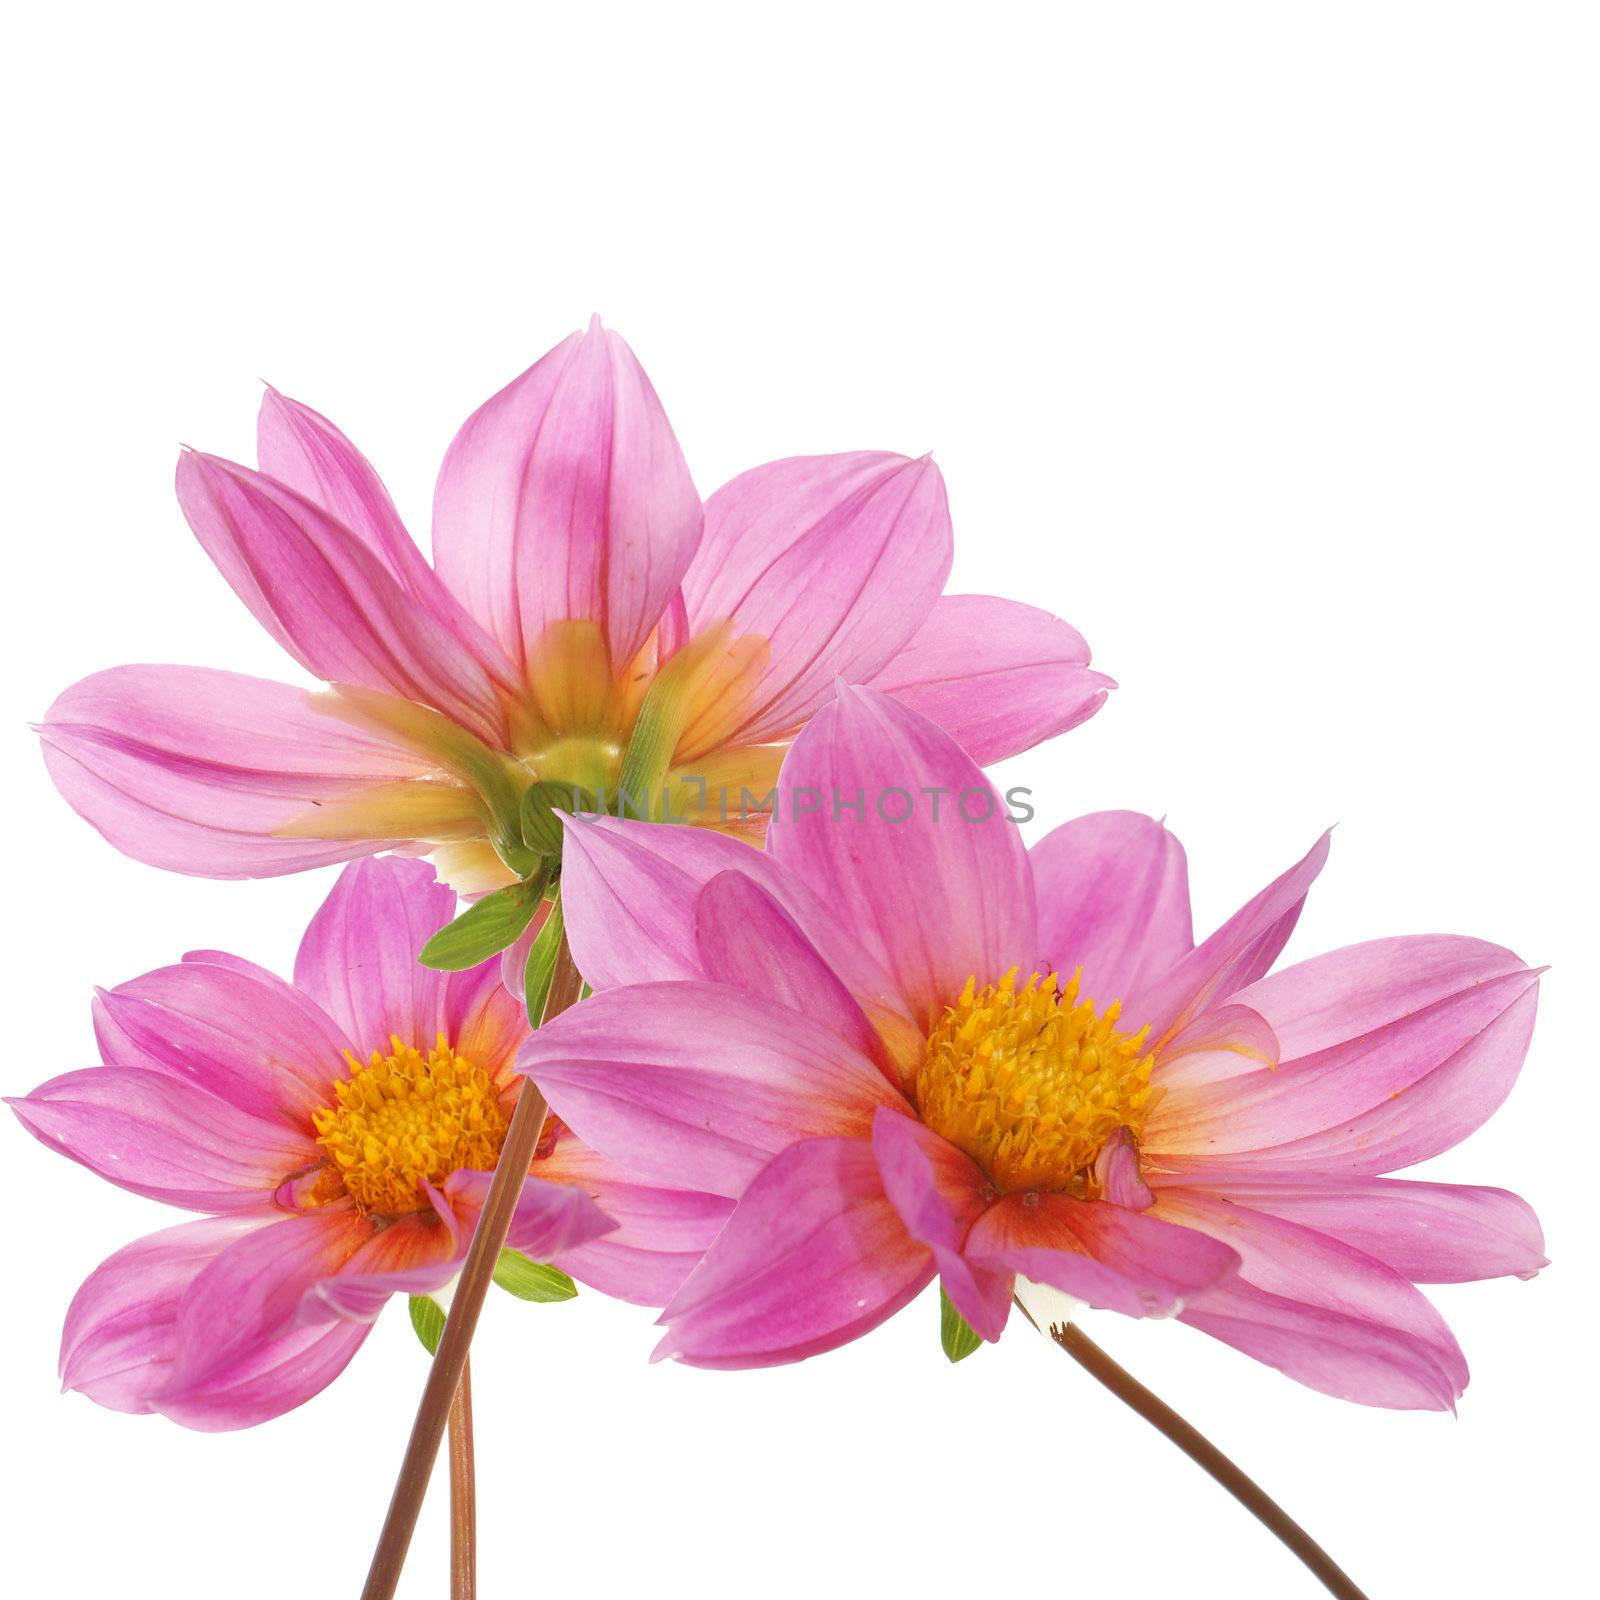 The pink beautiful decorative flowers over white background